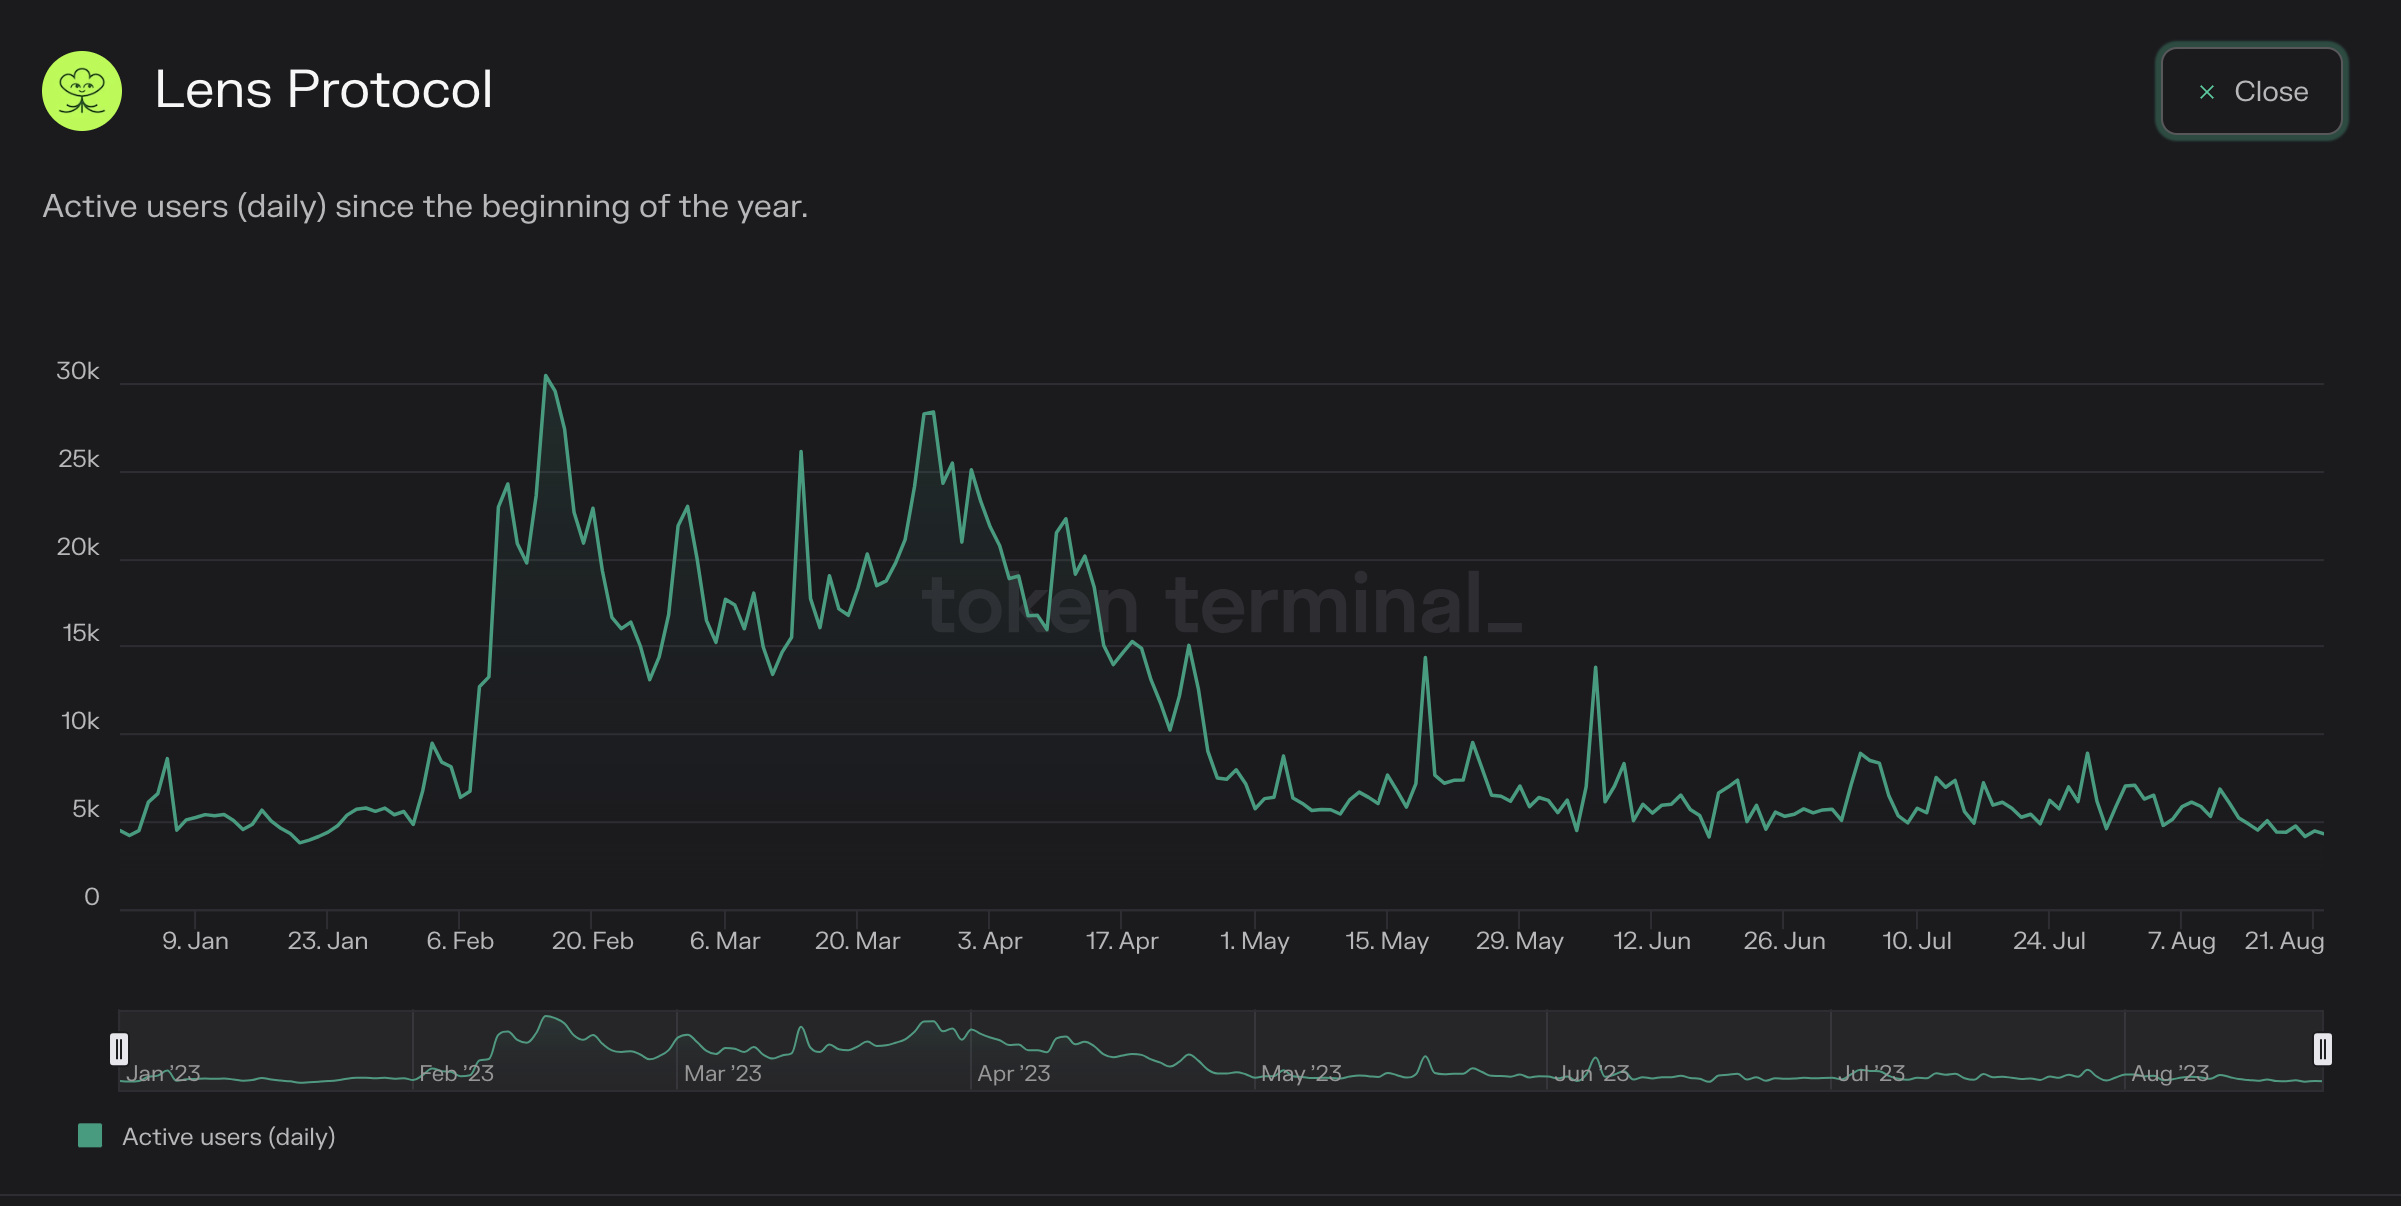 A spike was seen back in March and April, but since then daily users have leveled back out